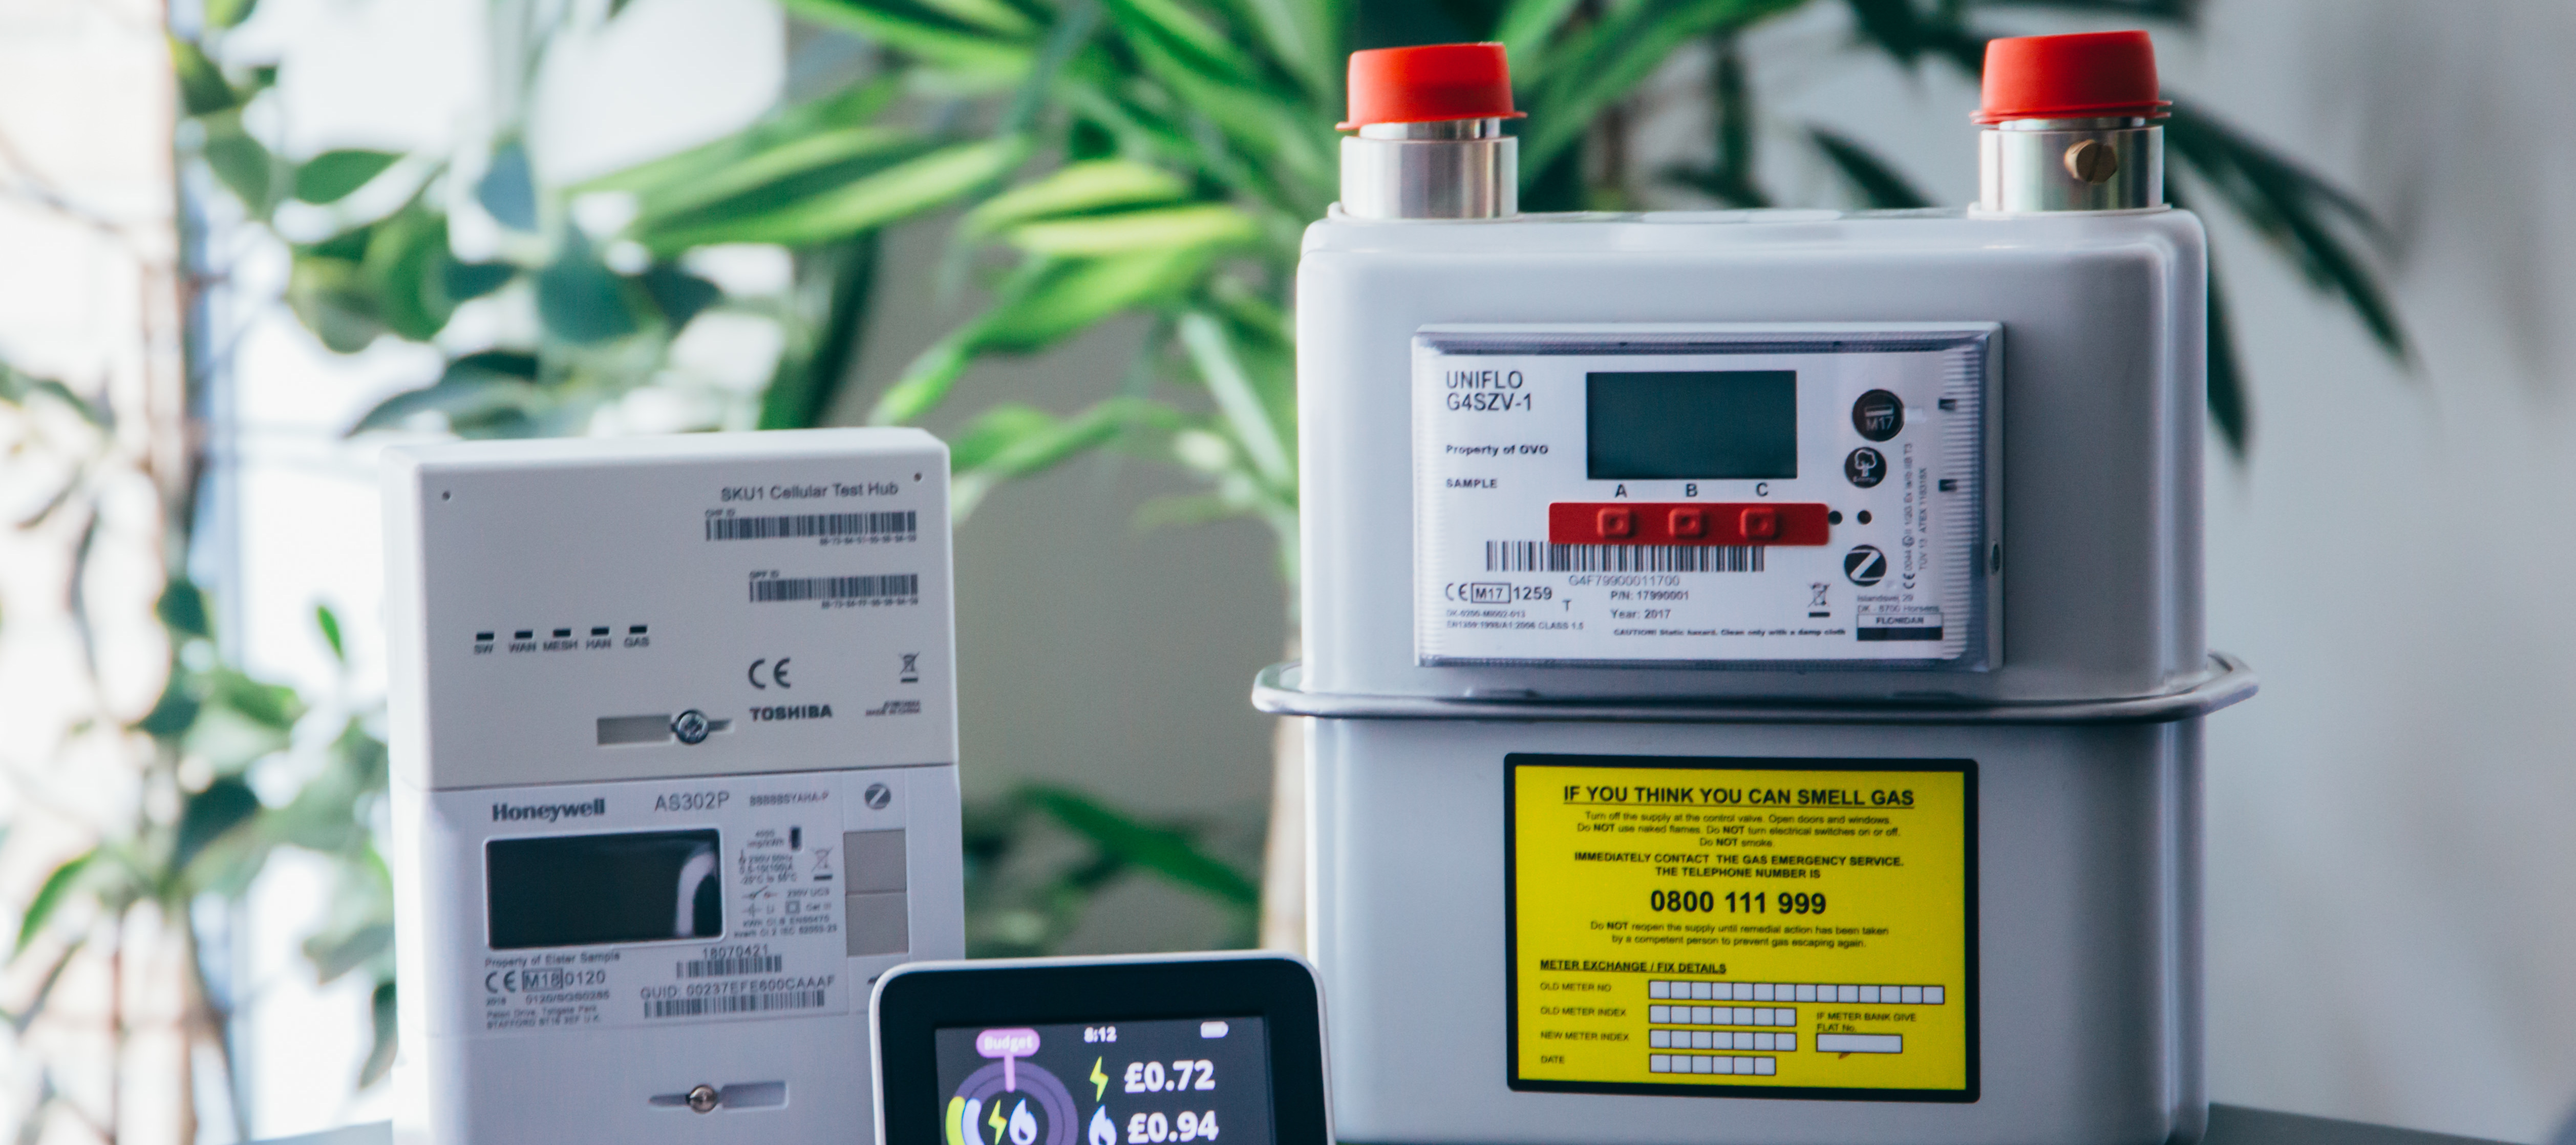 Are there any disadvantages to getting a smart meter?